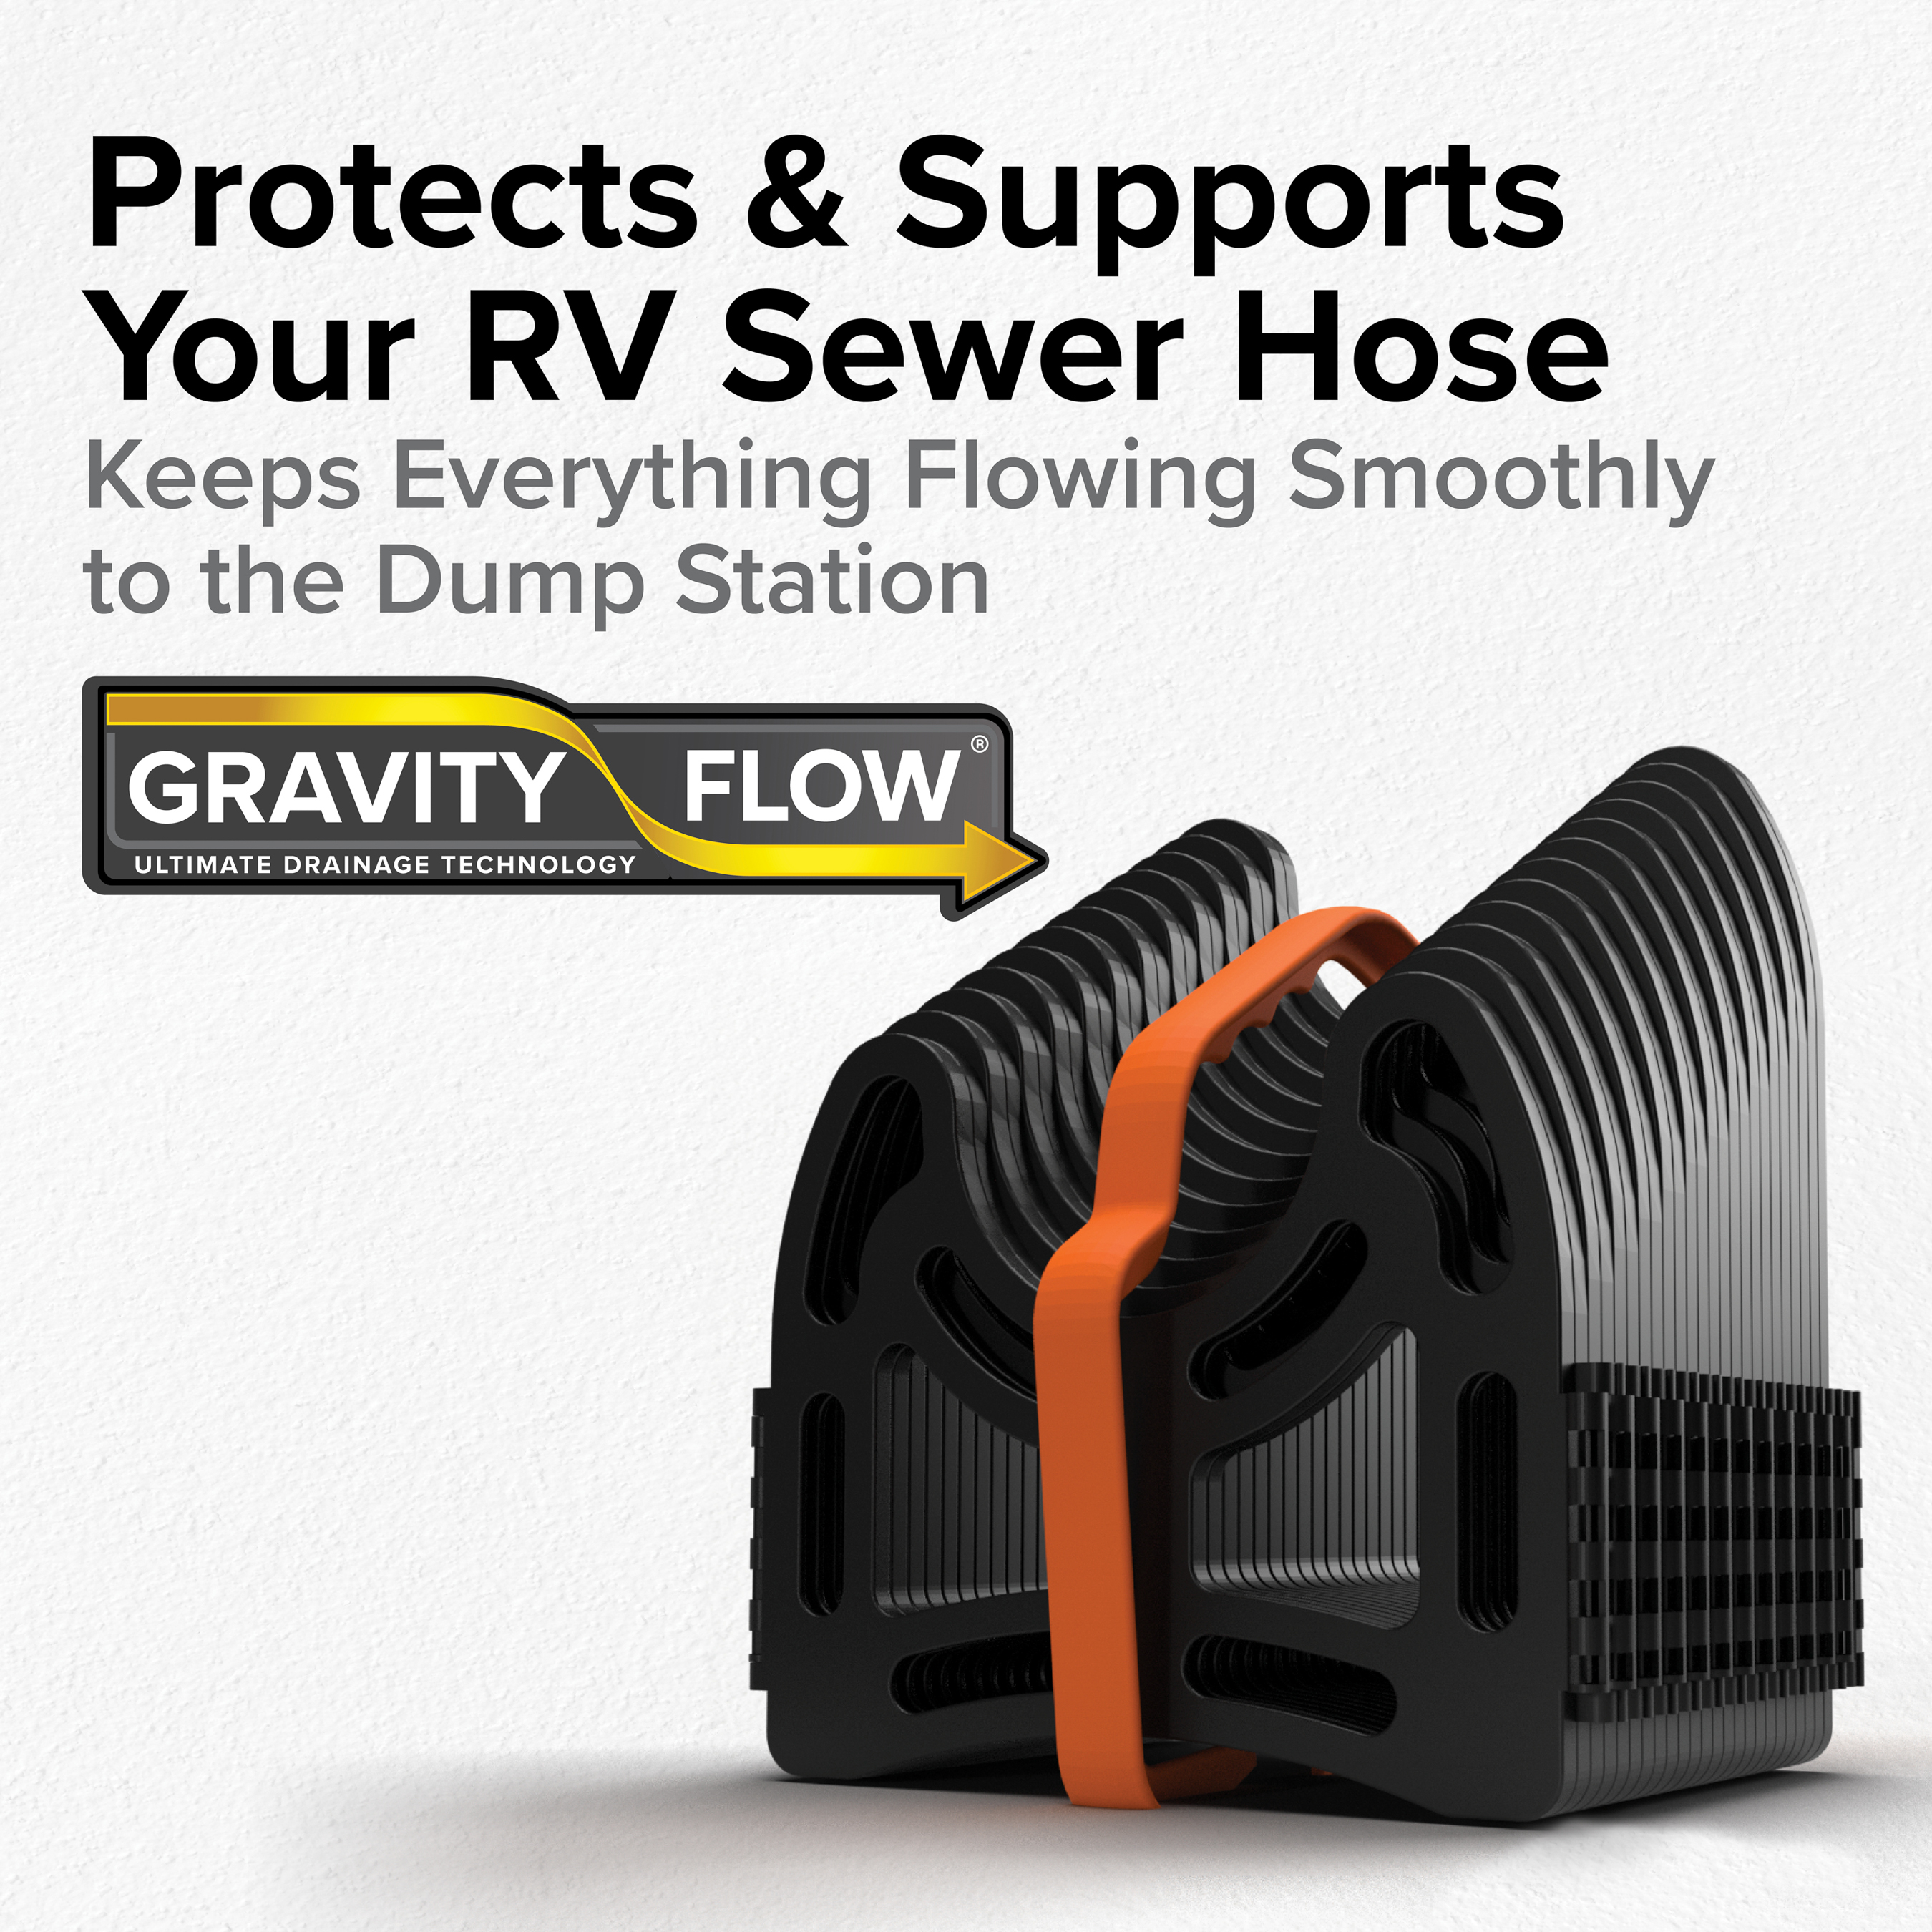 Camco Sidewinder RV Sewer Hose Support - Black, Heavy Duty Plastic - 20-Foot (43051) - image 4 of 8